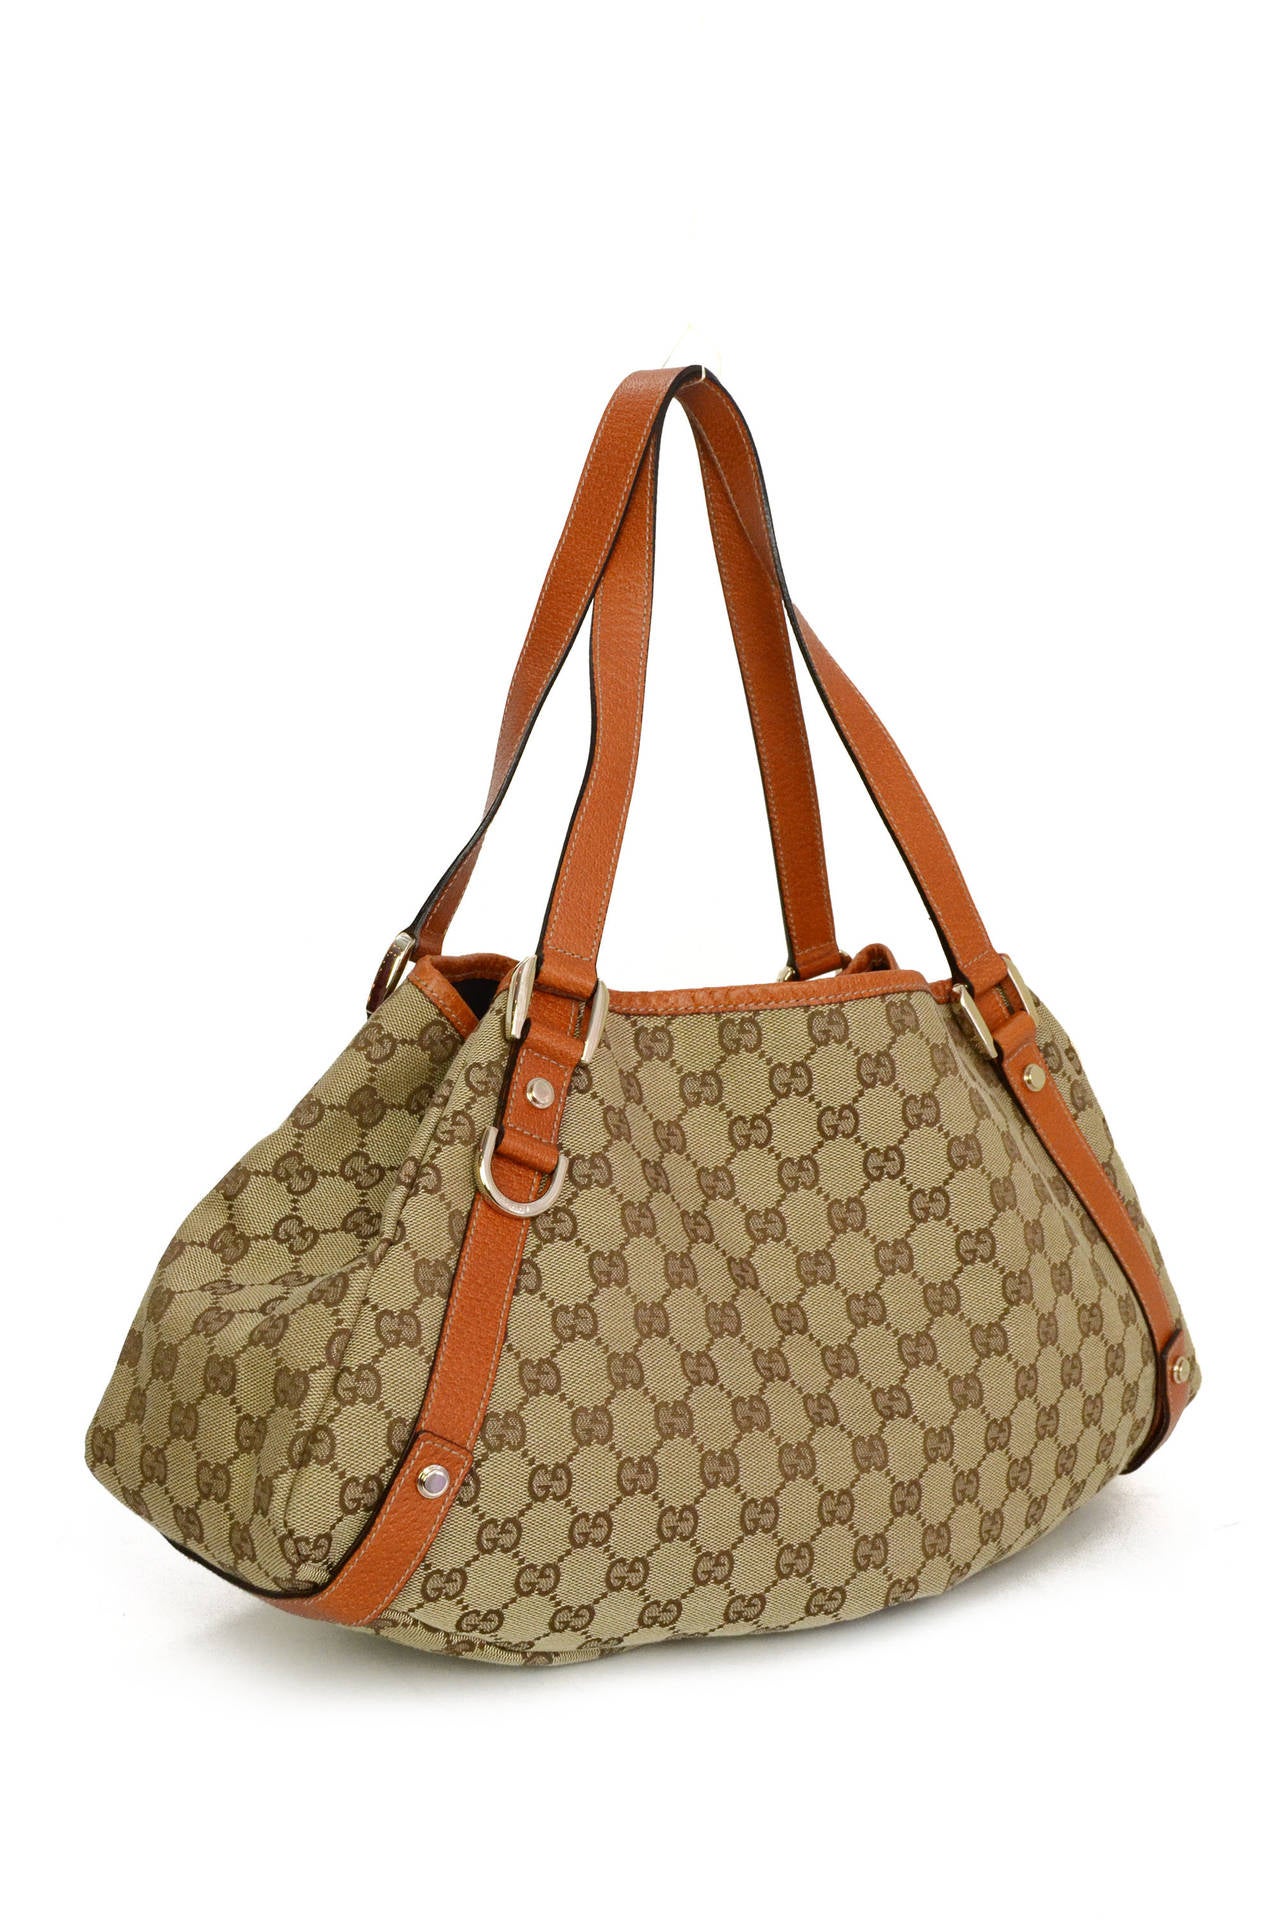 Gucci Monogram Canvas & Orange Leather Tote Bag
Features orange leather trim throughout
Made in: Italy
Color: Tan, orange and goldtone
Hardware: Goldtone
Materials: Leather and canvas
Lining: Brown textile
Closure/opening: Open top with side